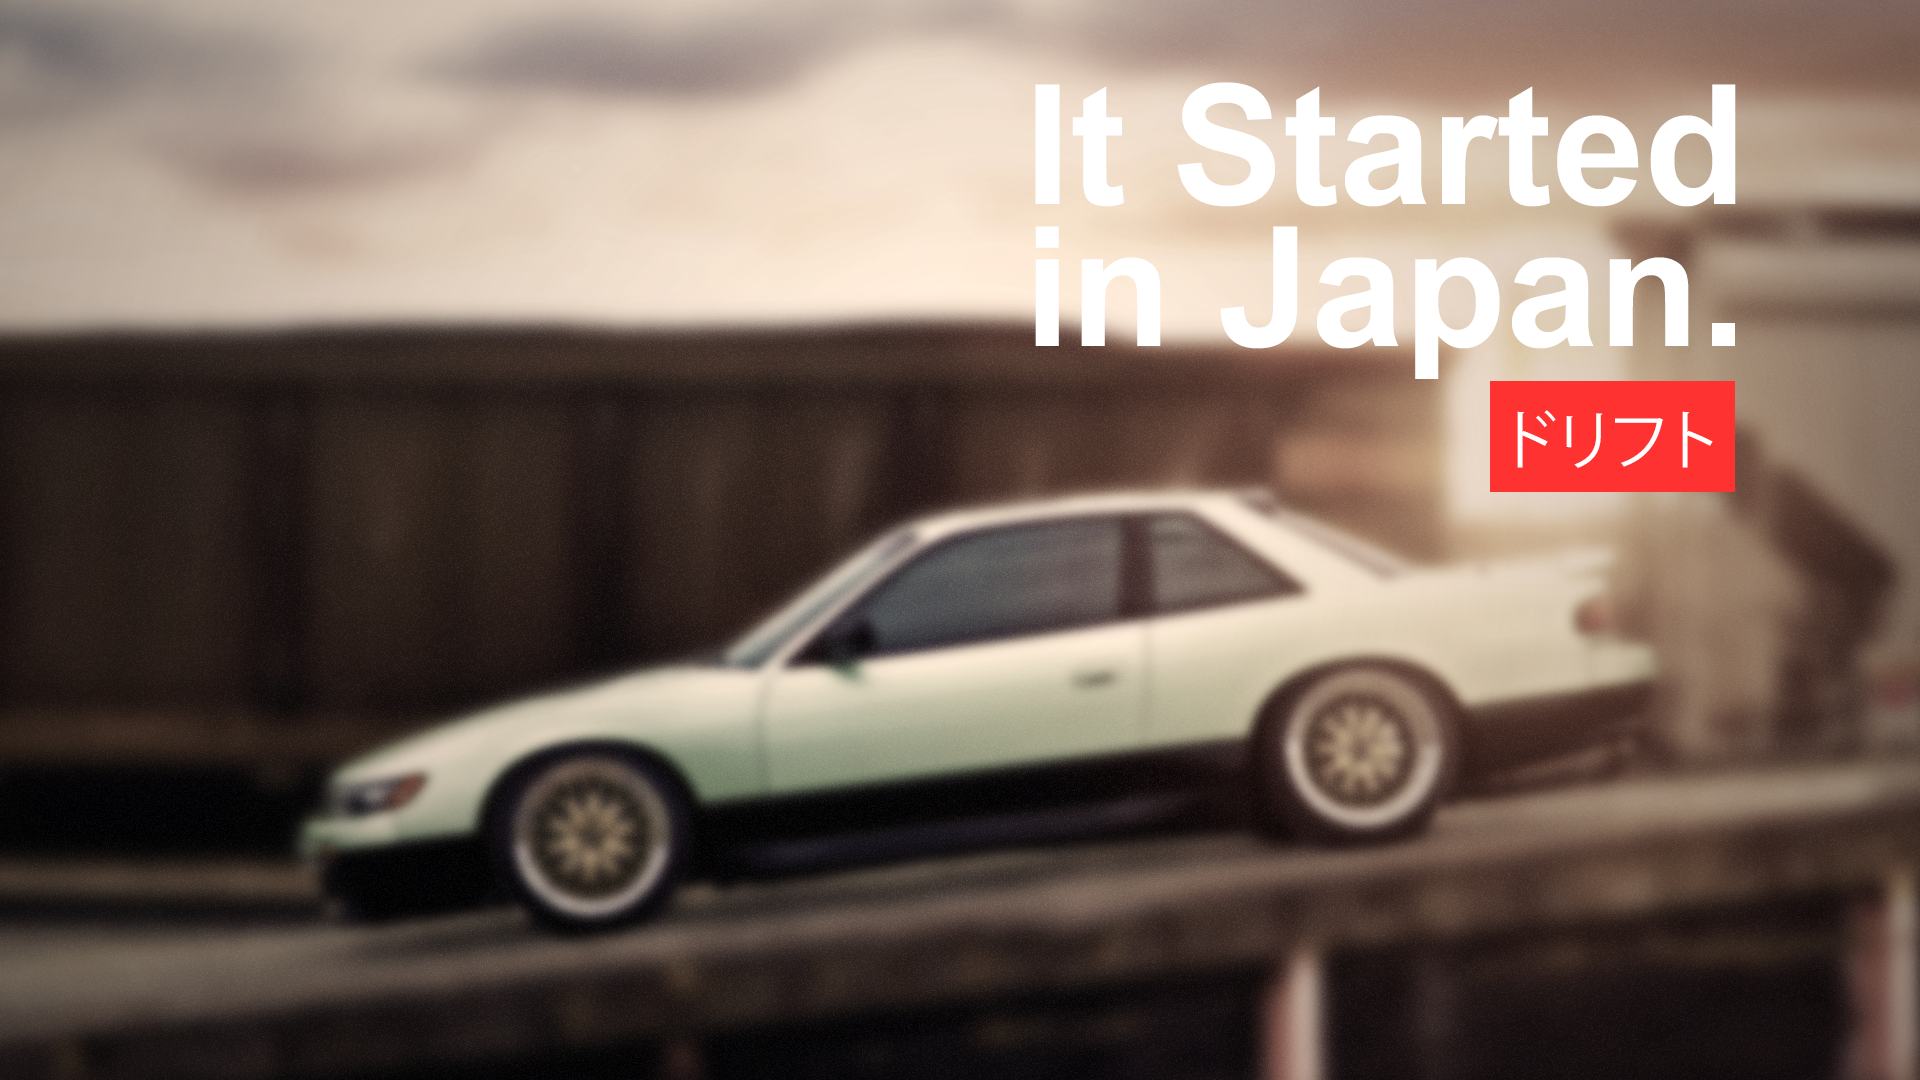 General 1920x1080 car vehicle Japanese cars Nissan Nissan Silvia It Started in Japan tuning Nissan Silvia S13 white cars